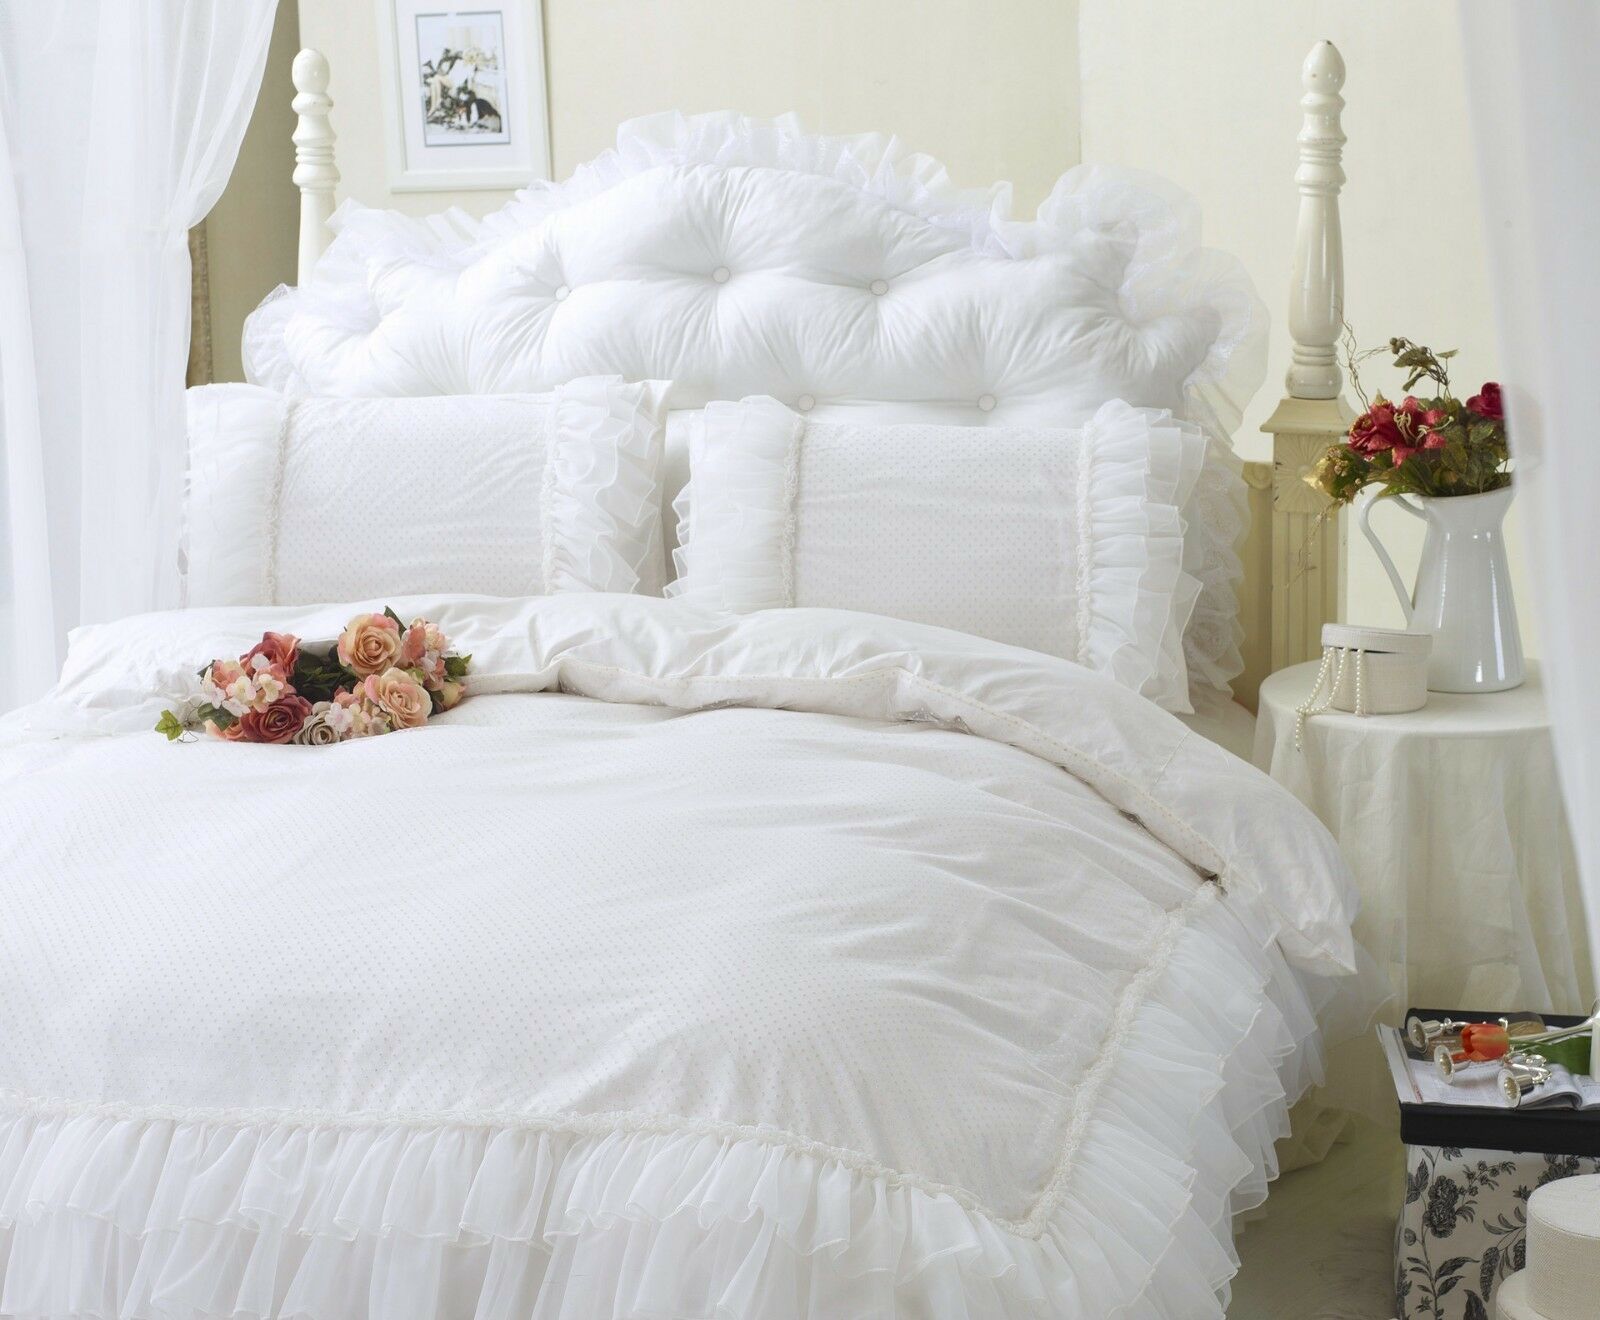 Luxury White Ruffle Lace Quilt Duvet Cover Bedding Set Full Queen